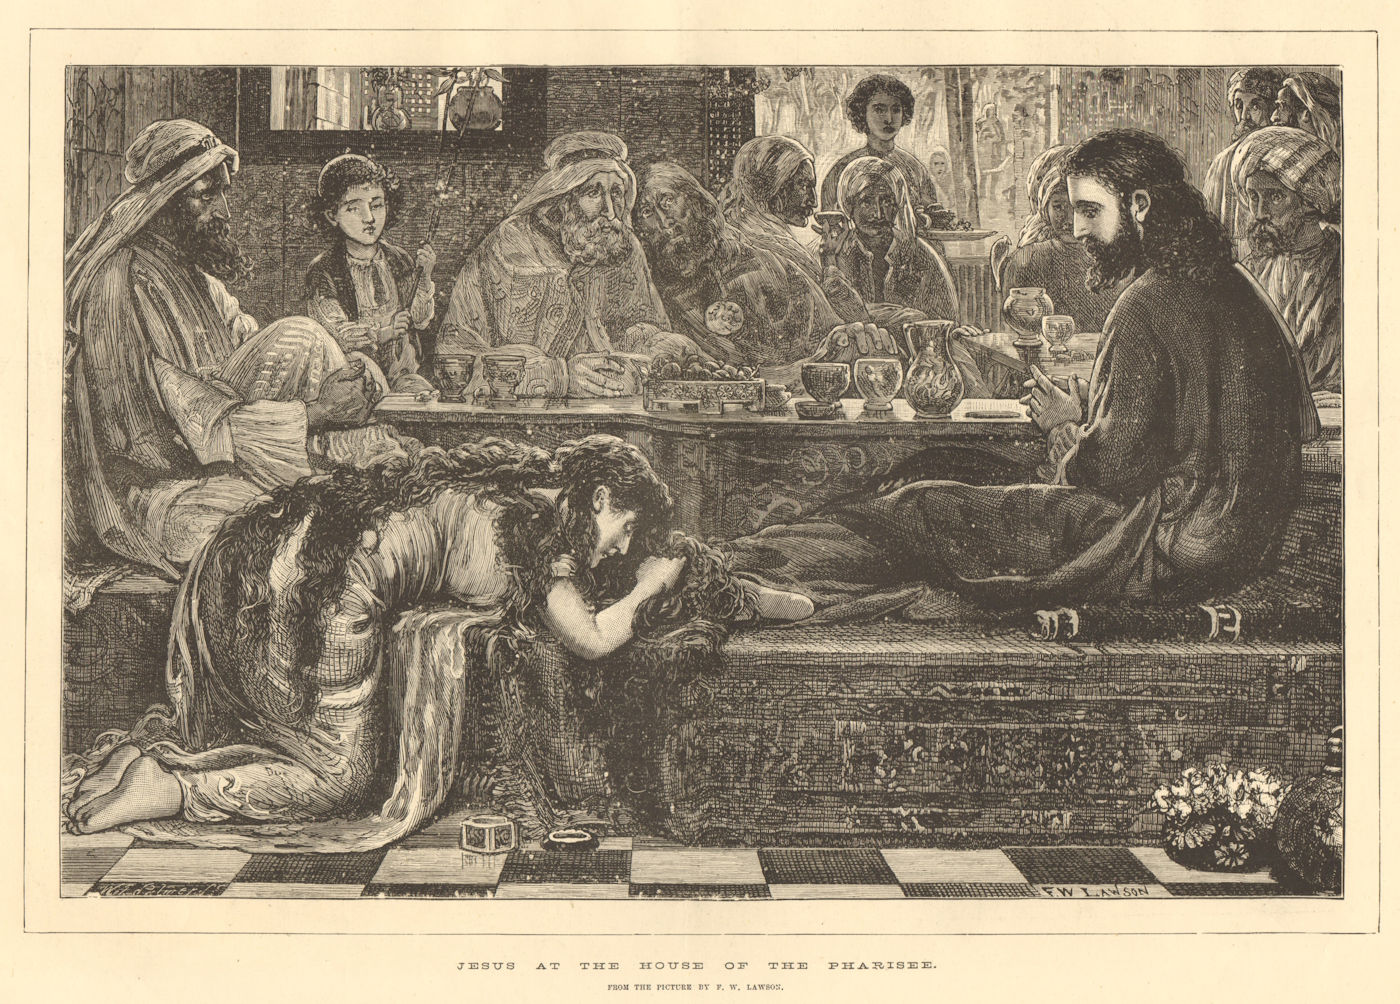 Jesus at the house of the Pharisee, by F. W. Lawson. Bible. Fine arts 1881